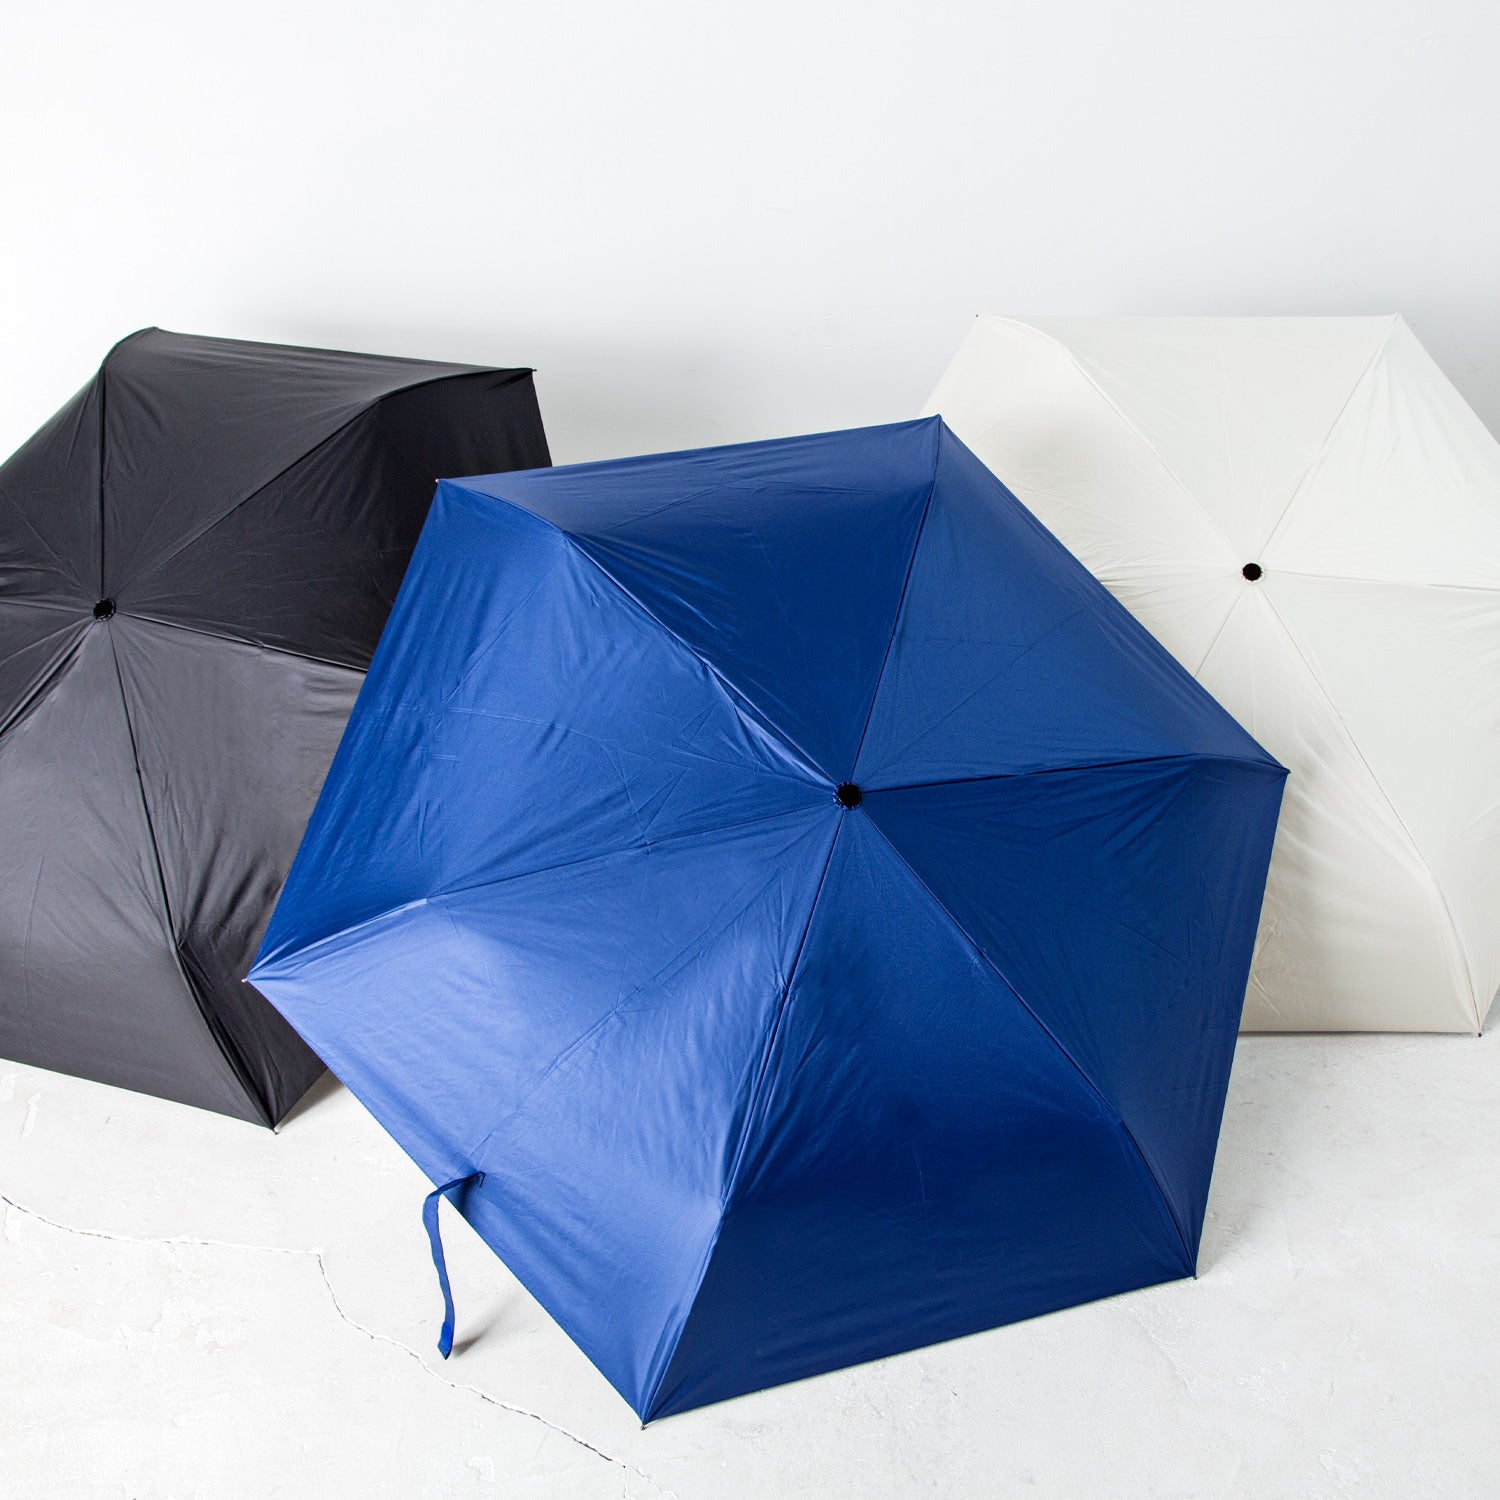 Waterfront] Official mail order for folding umbrellas that have